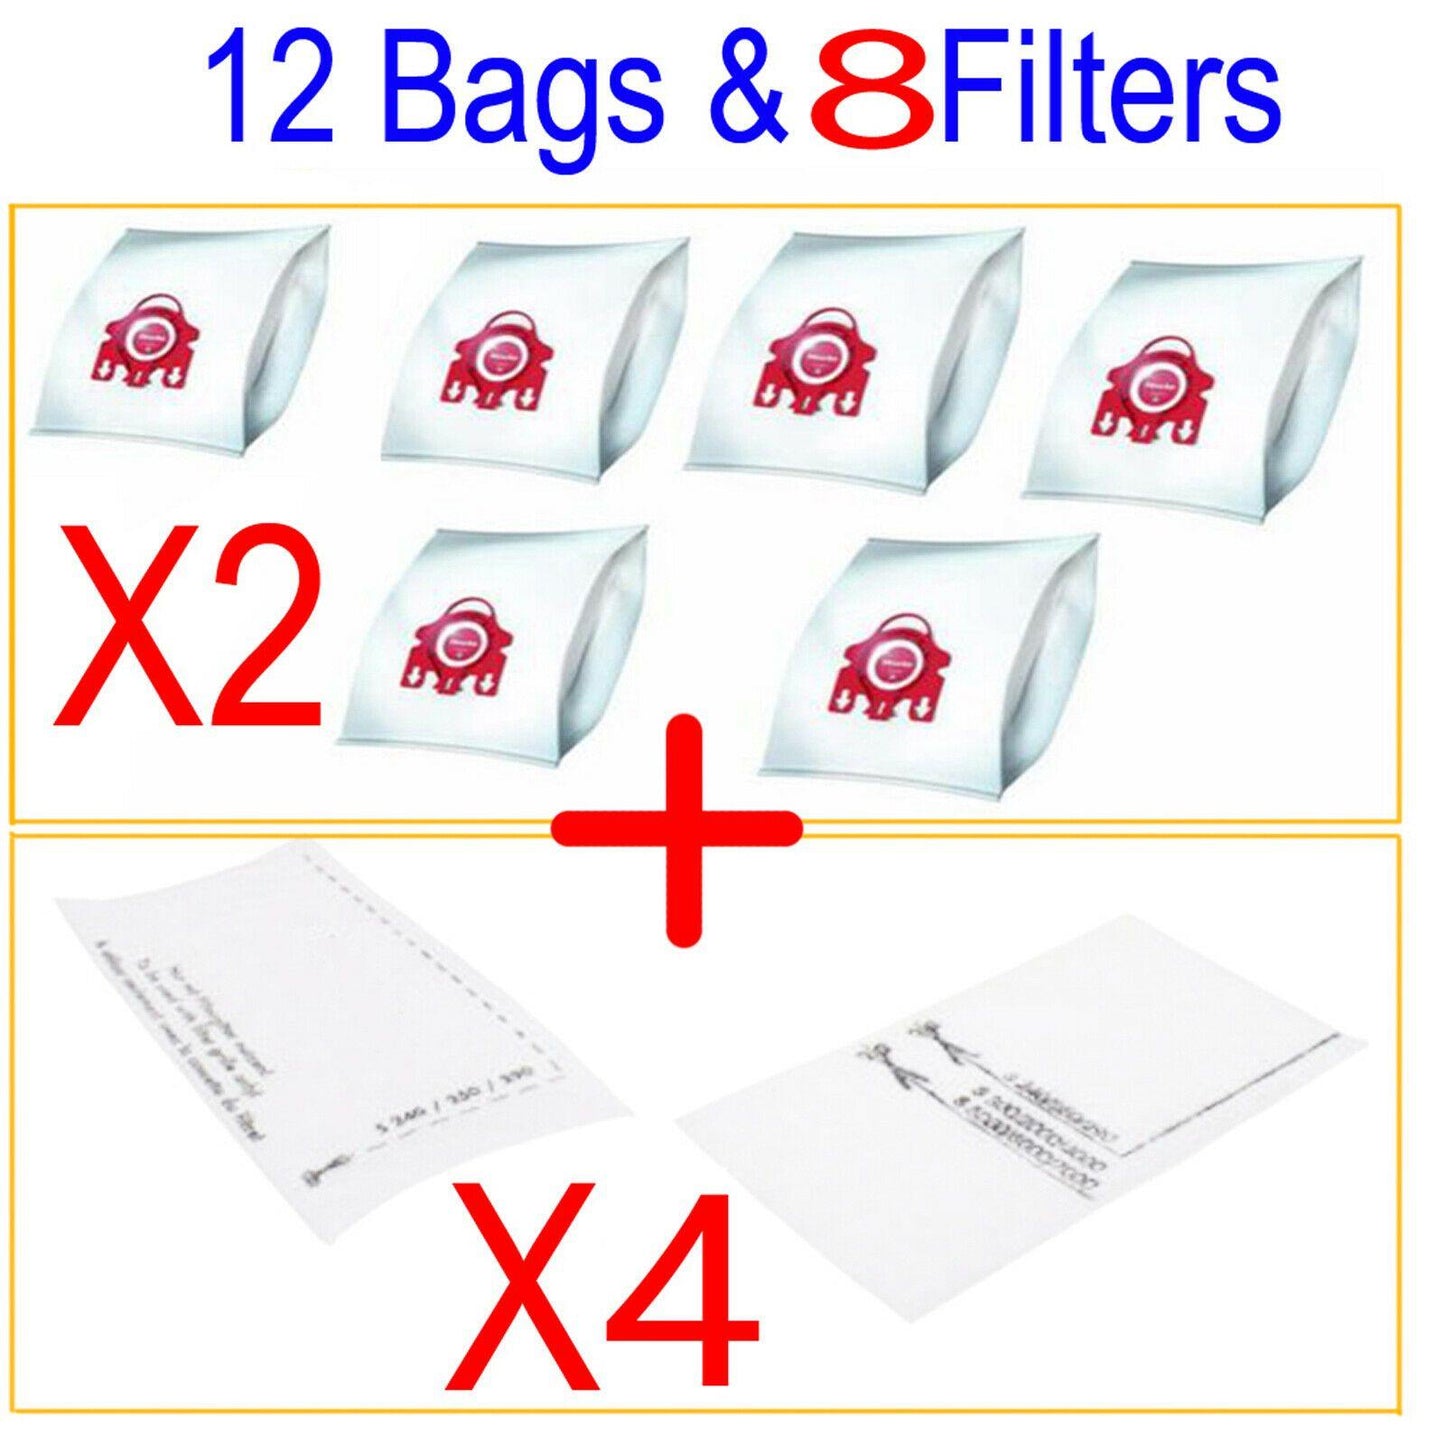 12 Synthetic Dust Bags & 8 Filters For Miele S511 S512 S512I S513 S514-1 S515-1 Sparesbarn